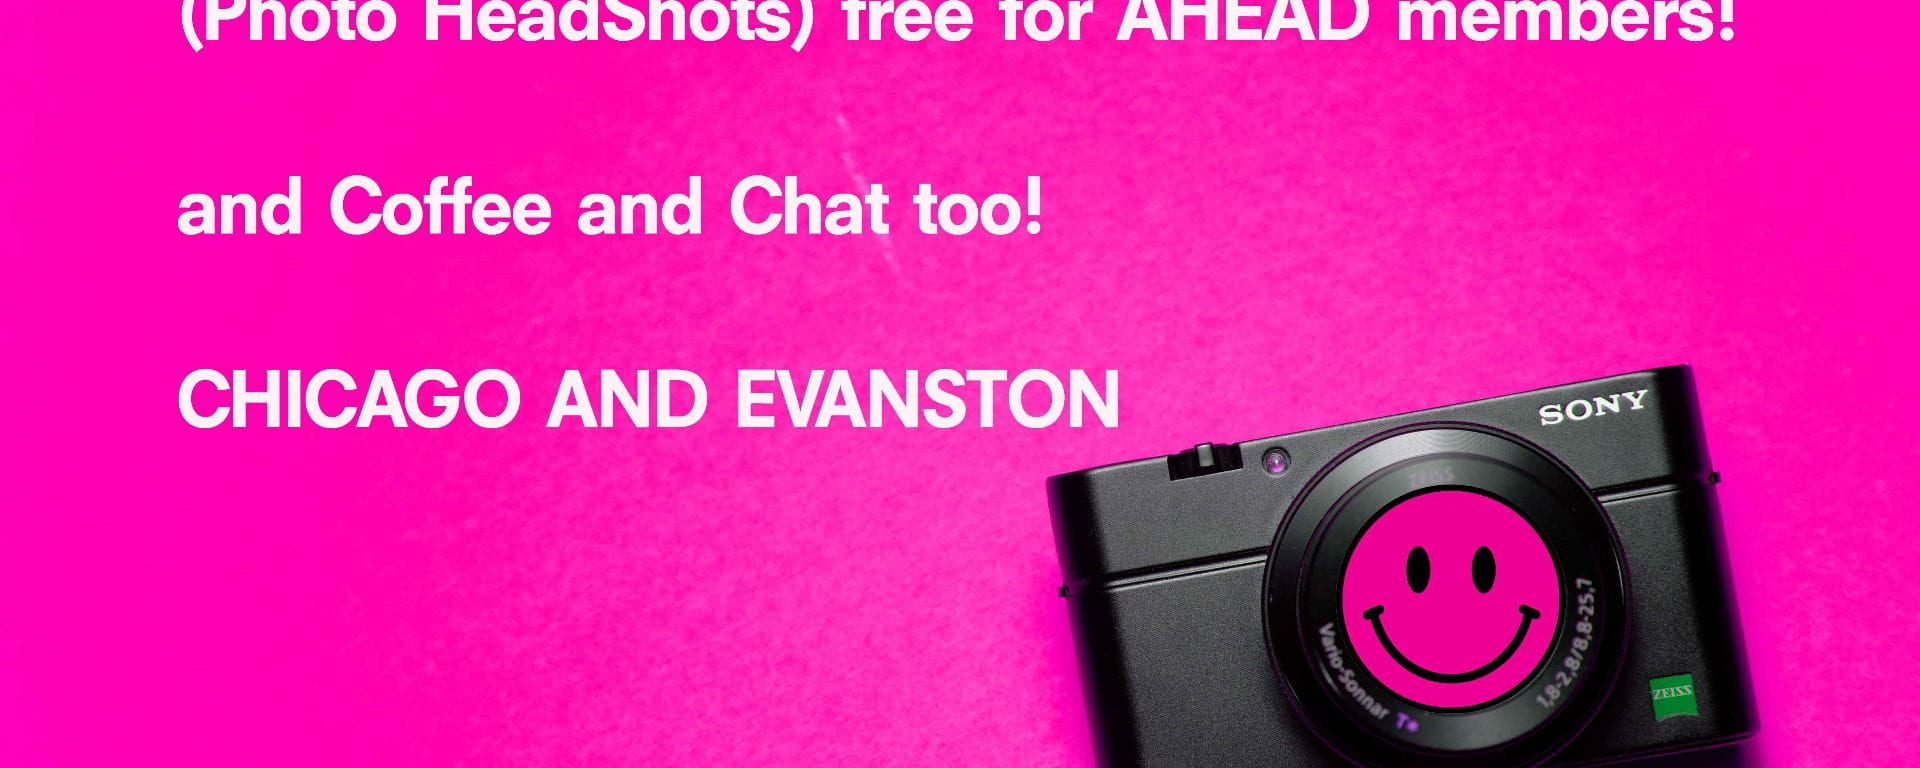 intro graphic with bright pink background with a photo of a camera and text that reads "AHEAD shots - photo head shots for AHEAD members on Chicago and Evanston campuses